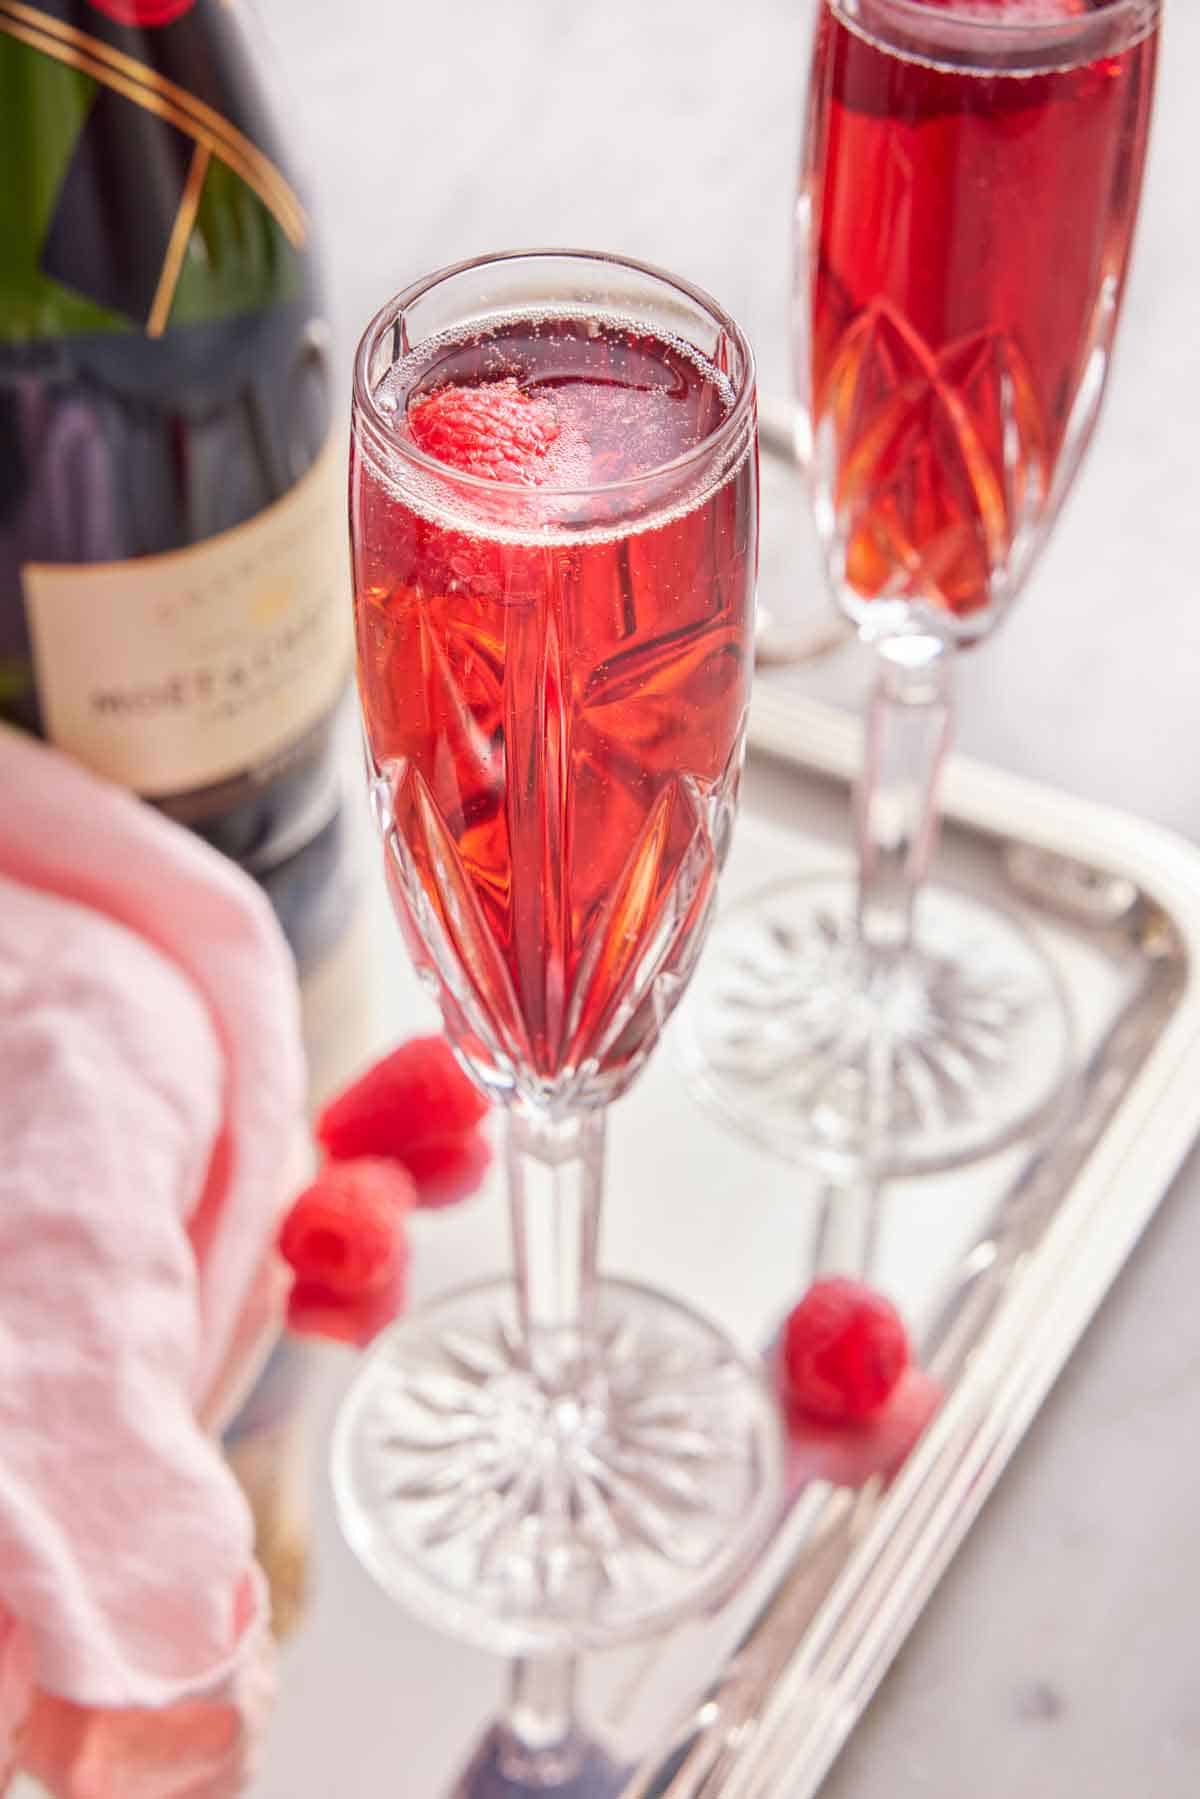 Two glasses of Kir Royale and a bottle of champagne on a tray.